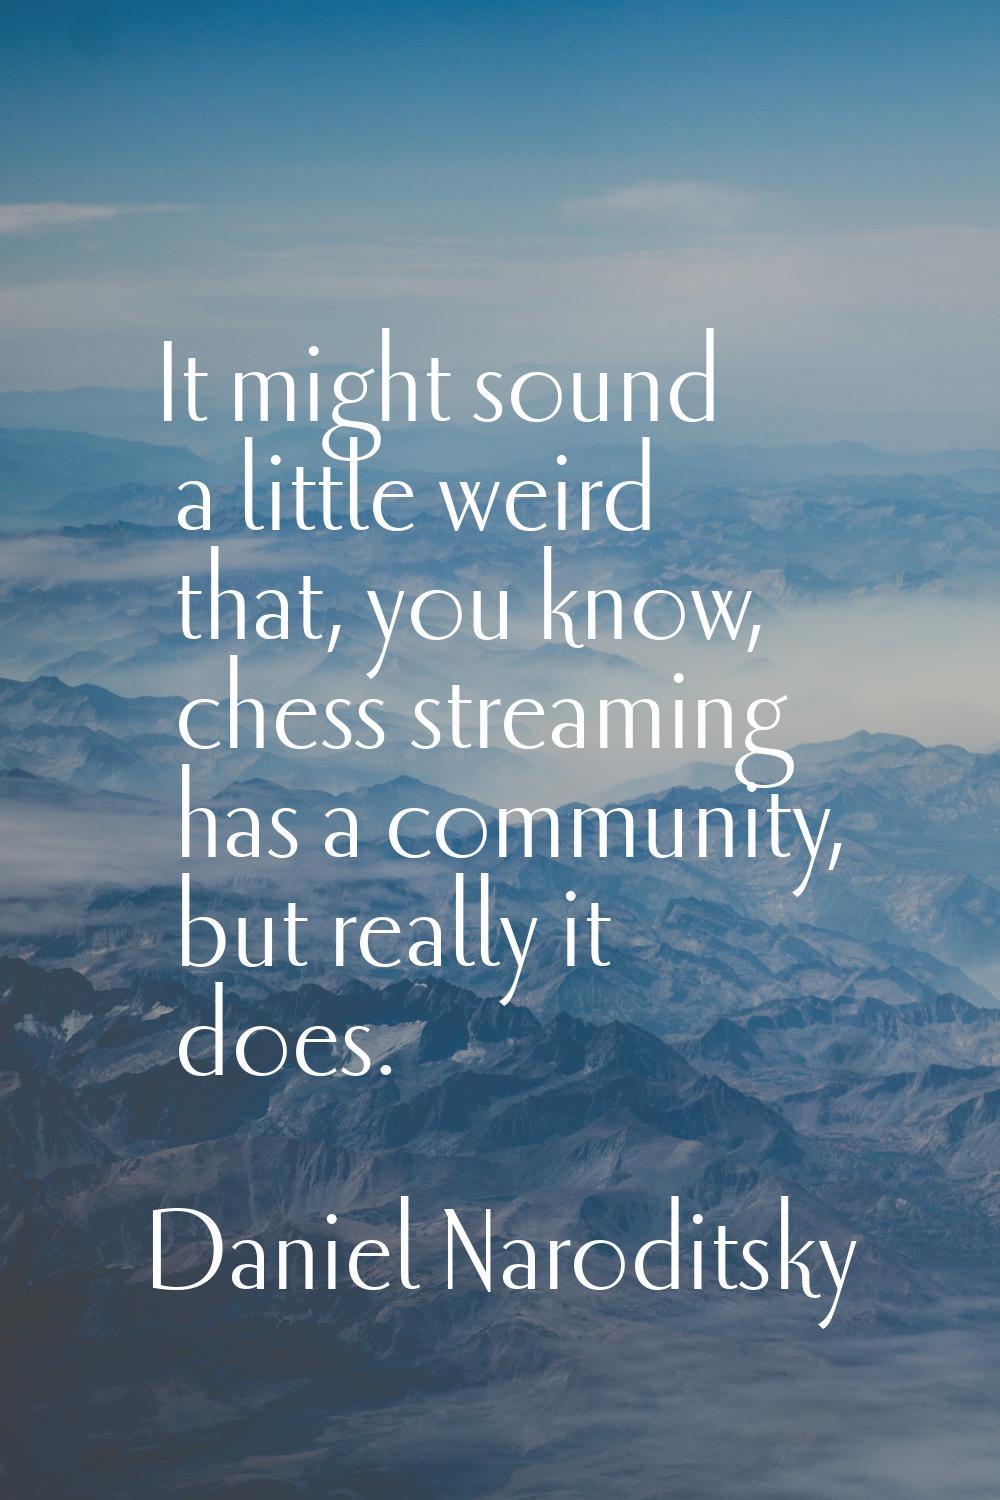 It might sound a little weird that, you know, chess streaming has a community, but really it does.